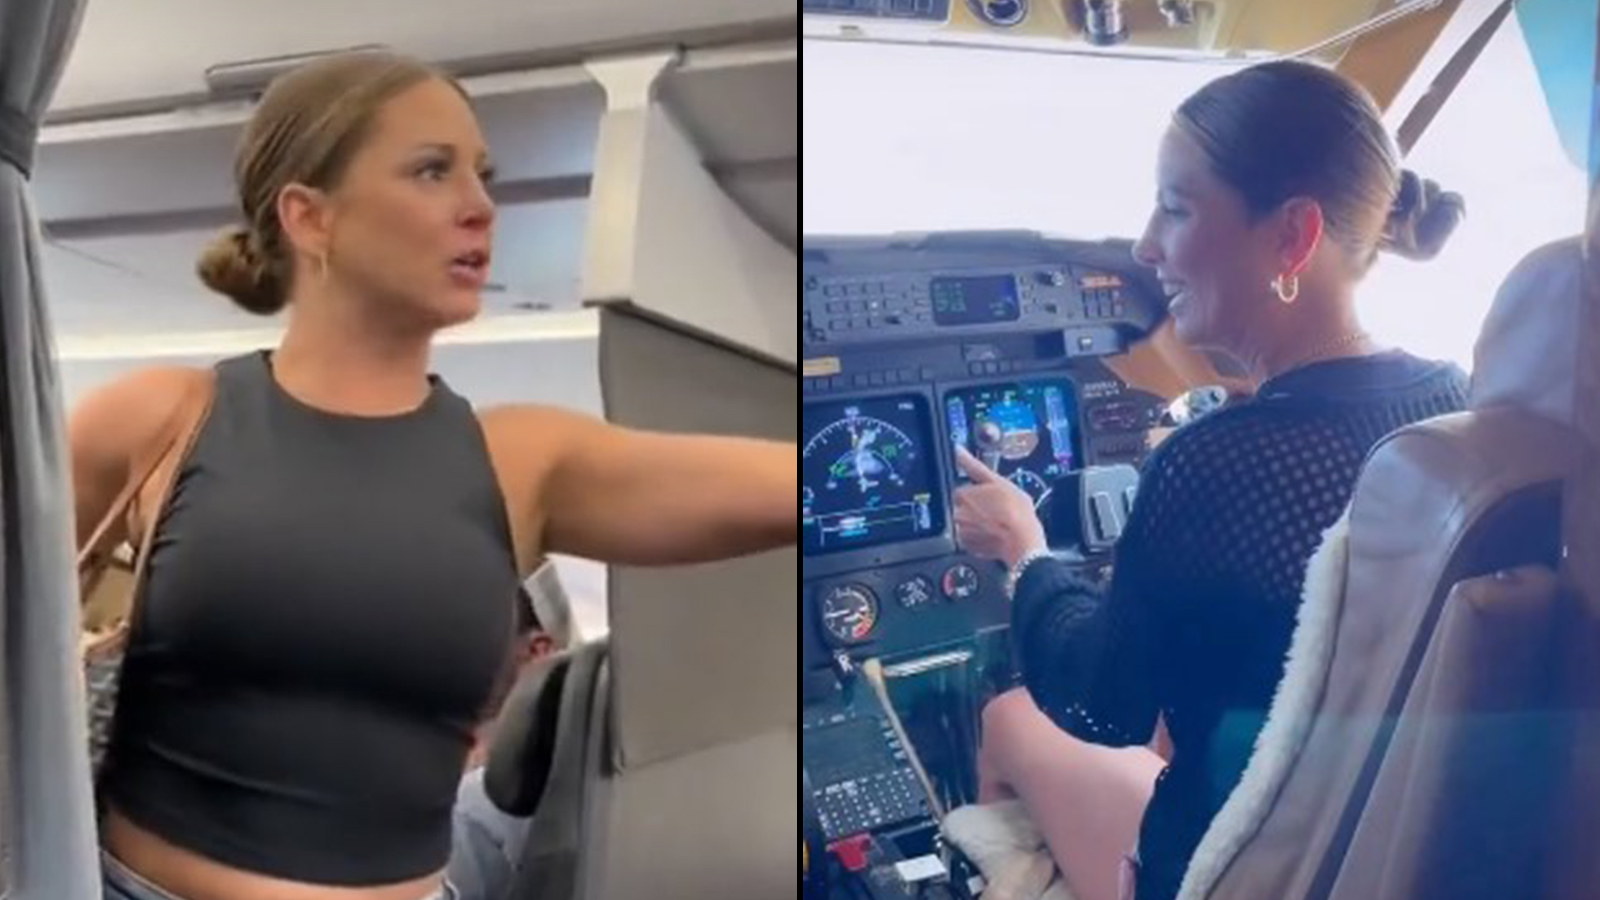 “Not real” plane woman goes viral again by flying aircraft one year after meltdown